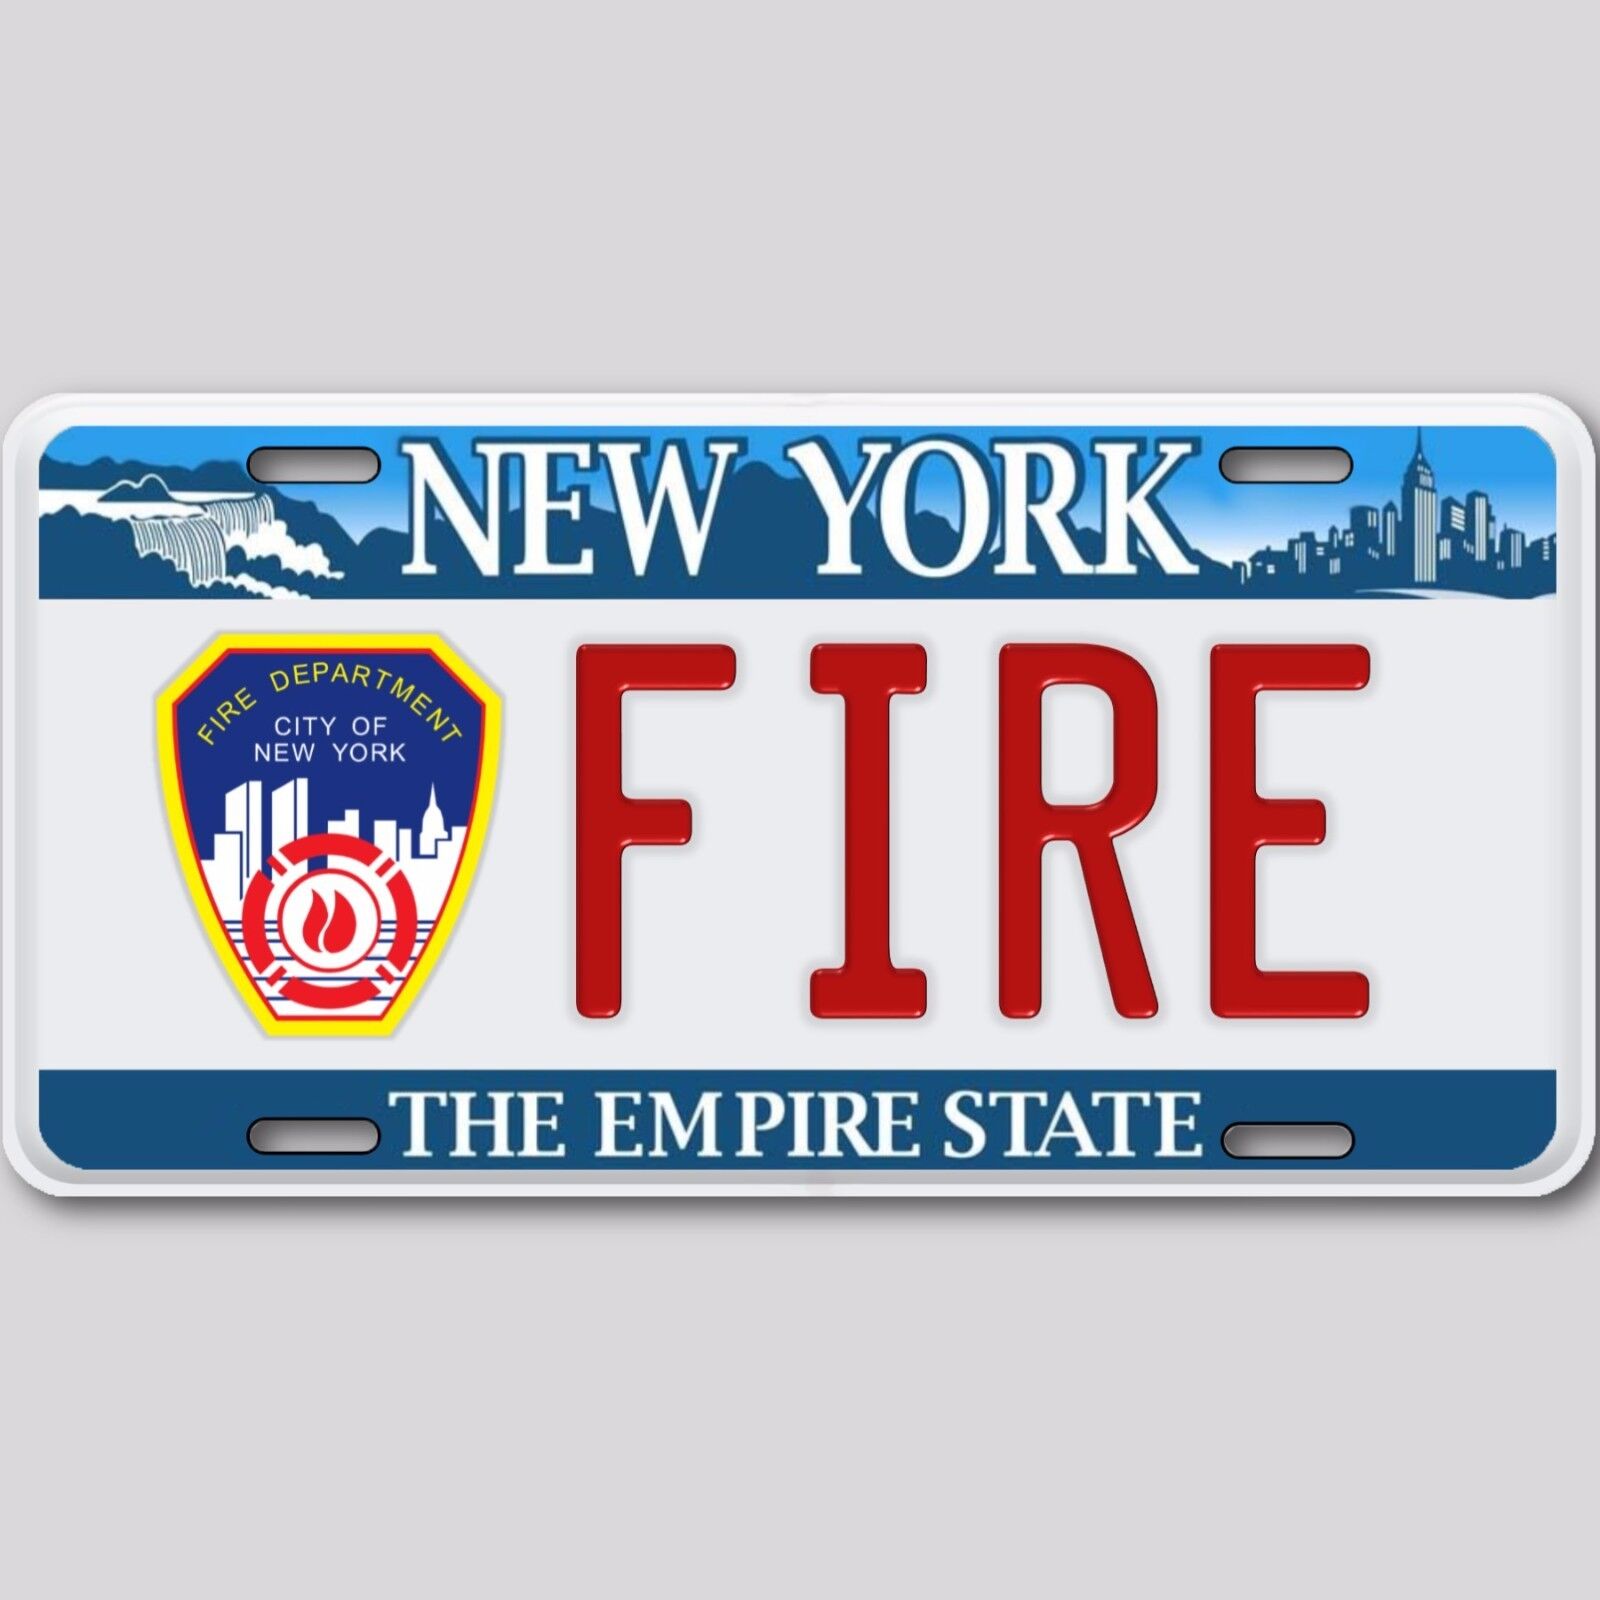 New York City Fire Department Novelty Aluminum License Plate Tag Metal New 